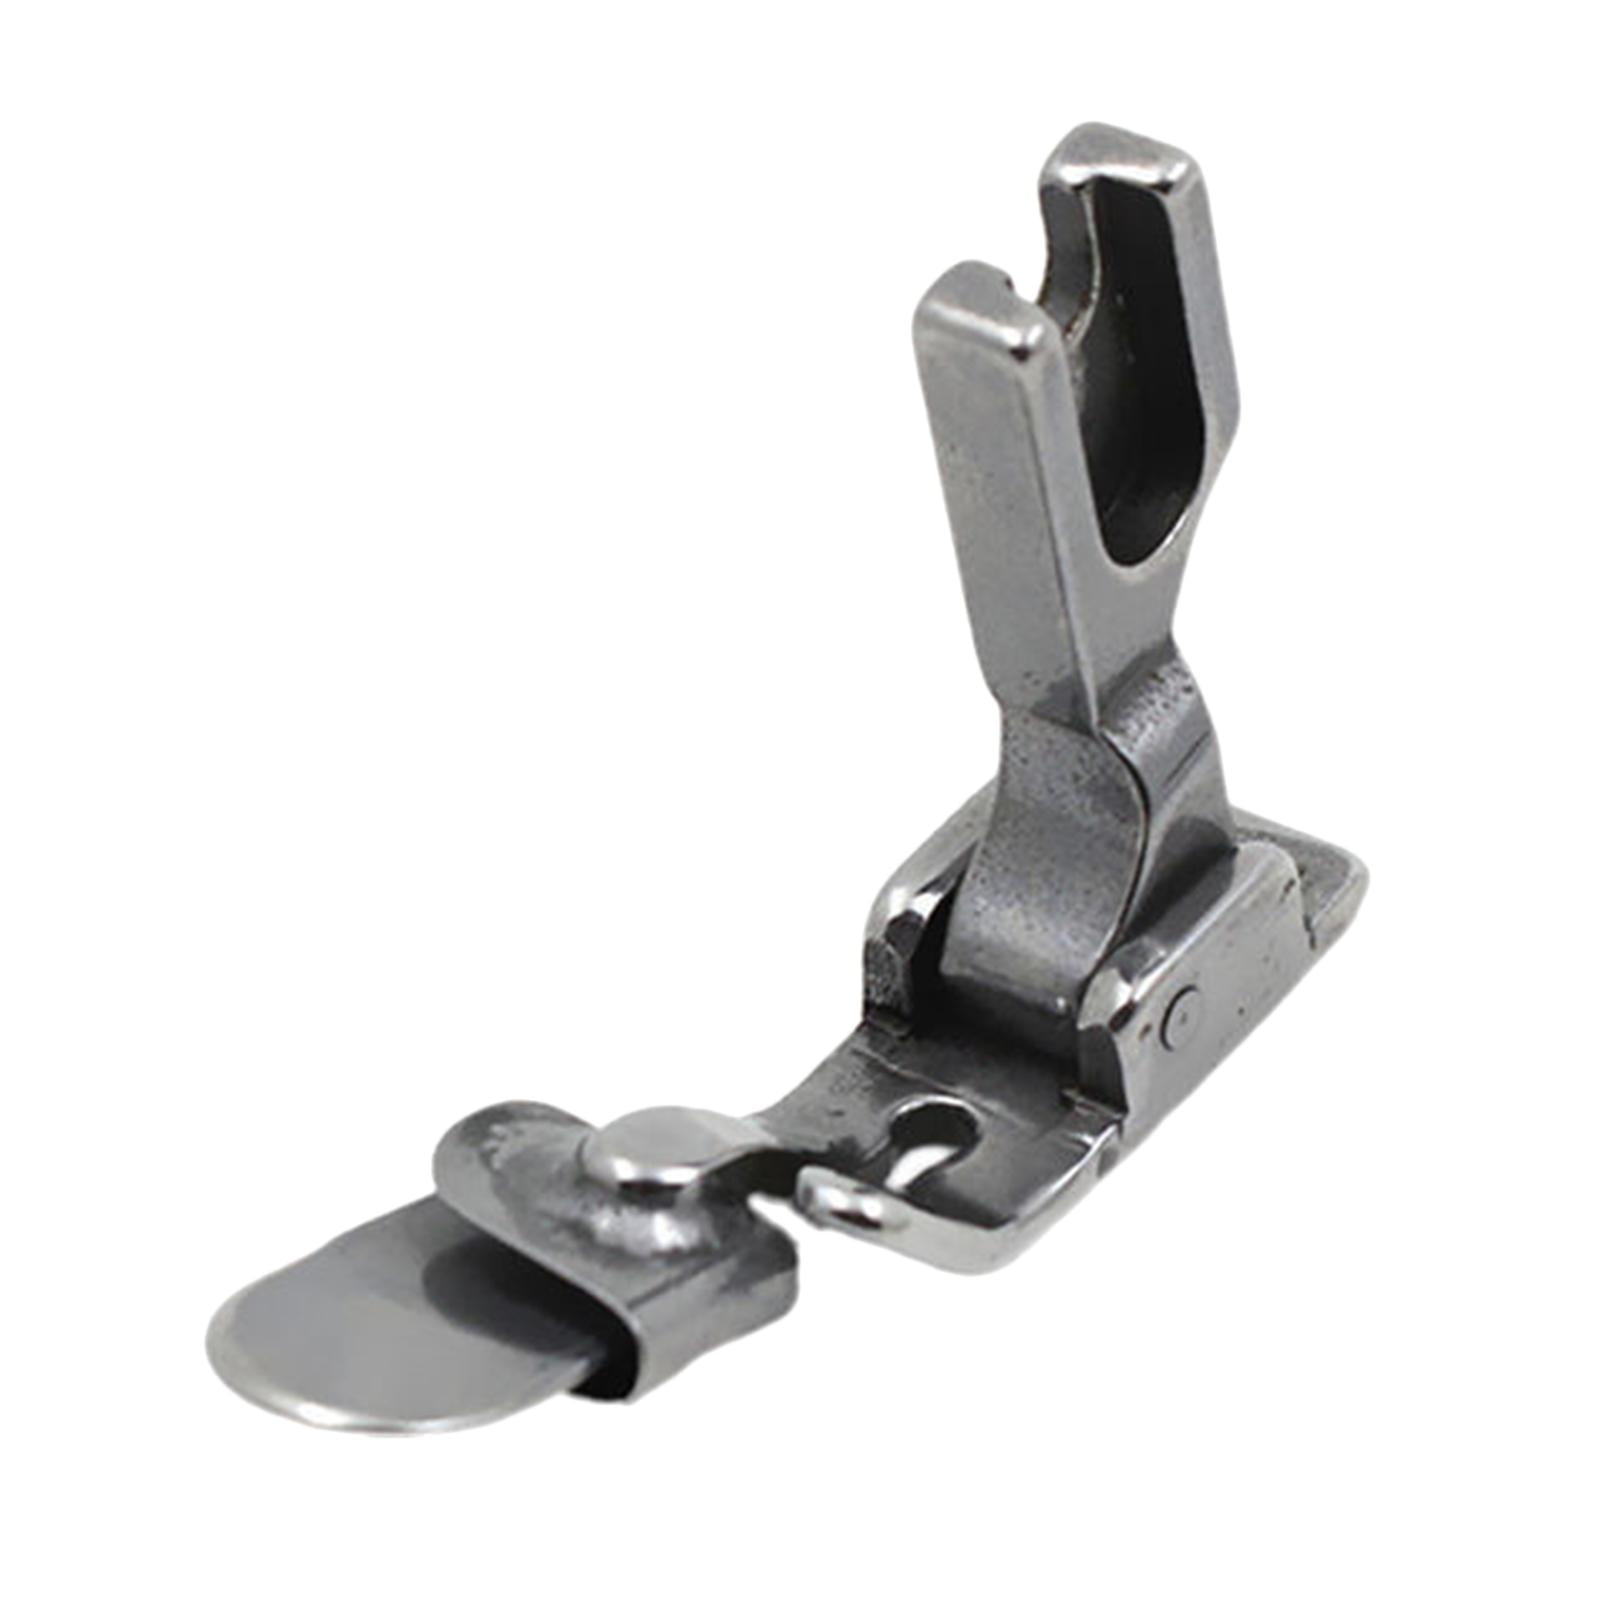 1x Presser Foot Attachments Replacement Folding Steel Industrial Flat  Typical Fold Fabric for Industrial Sewing Machine for thick fabric